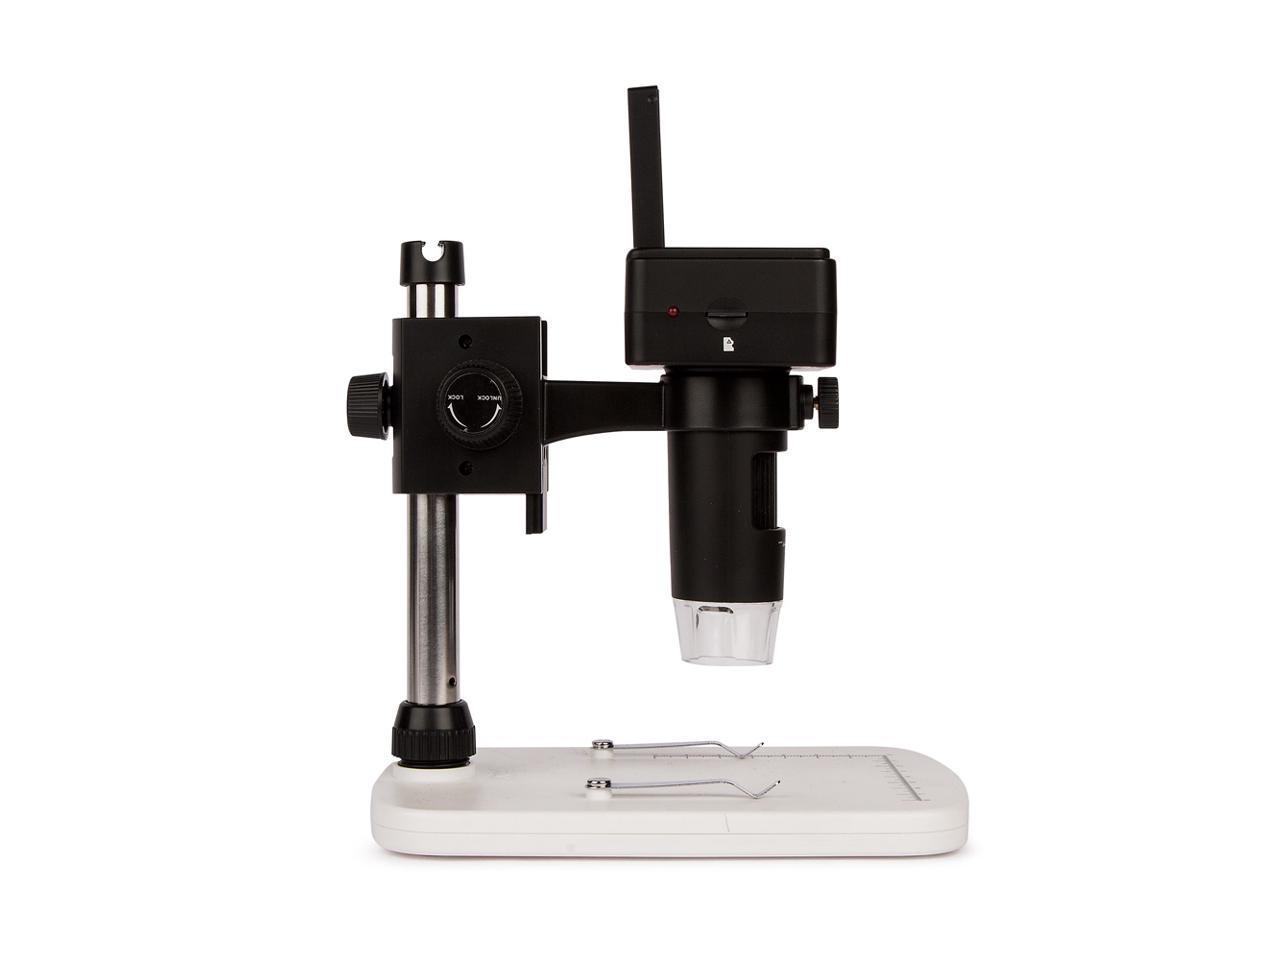 Veho Discovery DX-3 2-in1 USB Digital 12MP Portable microscope & telescope | x1600 Magnification | Photo/Video Capture | 2.4" LCD Screen | Rechargeable battery | HDMI | Micro SD card (VMS-008-DX3)